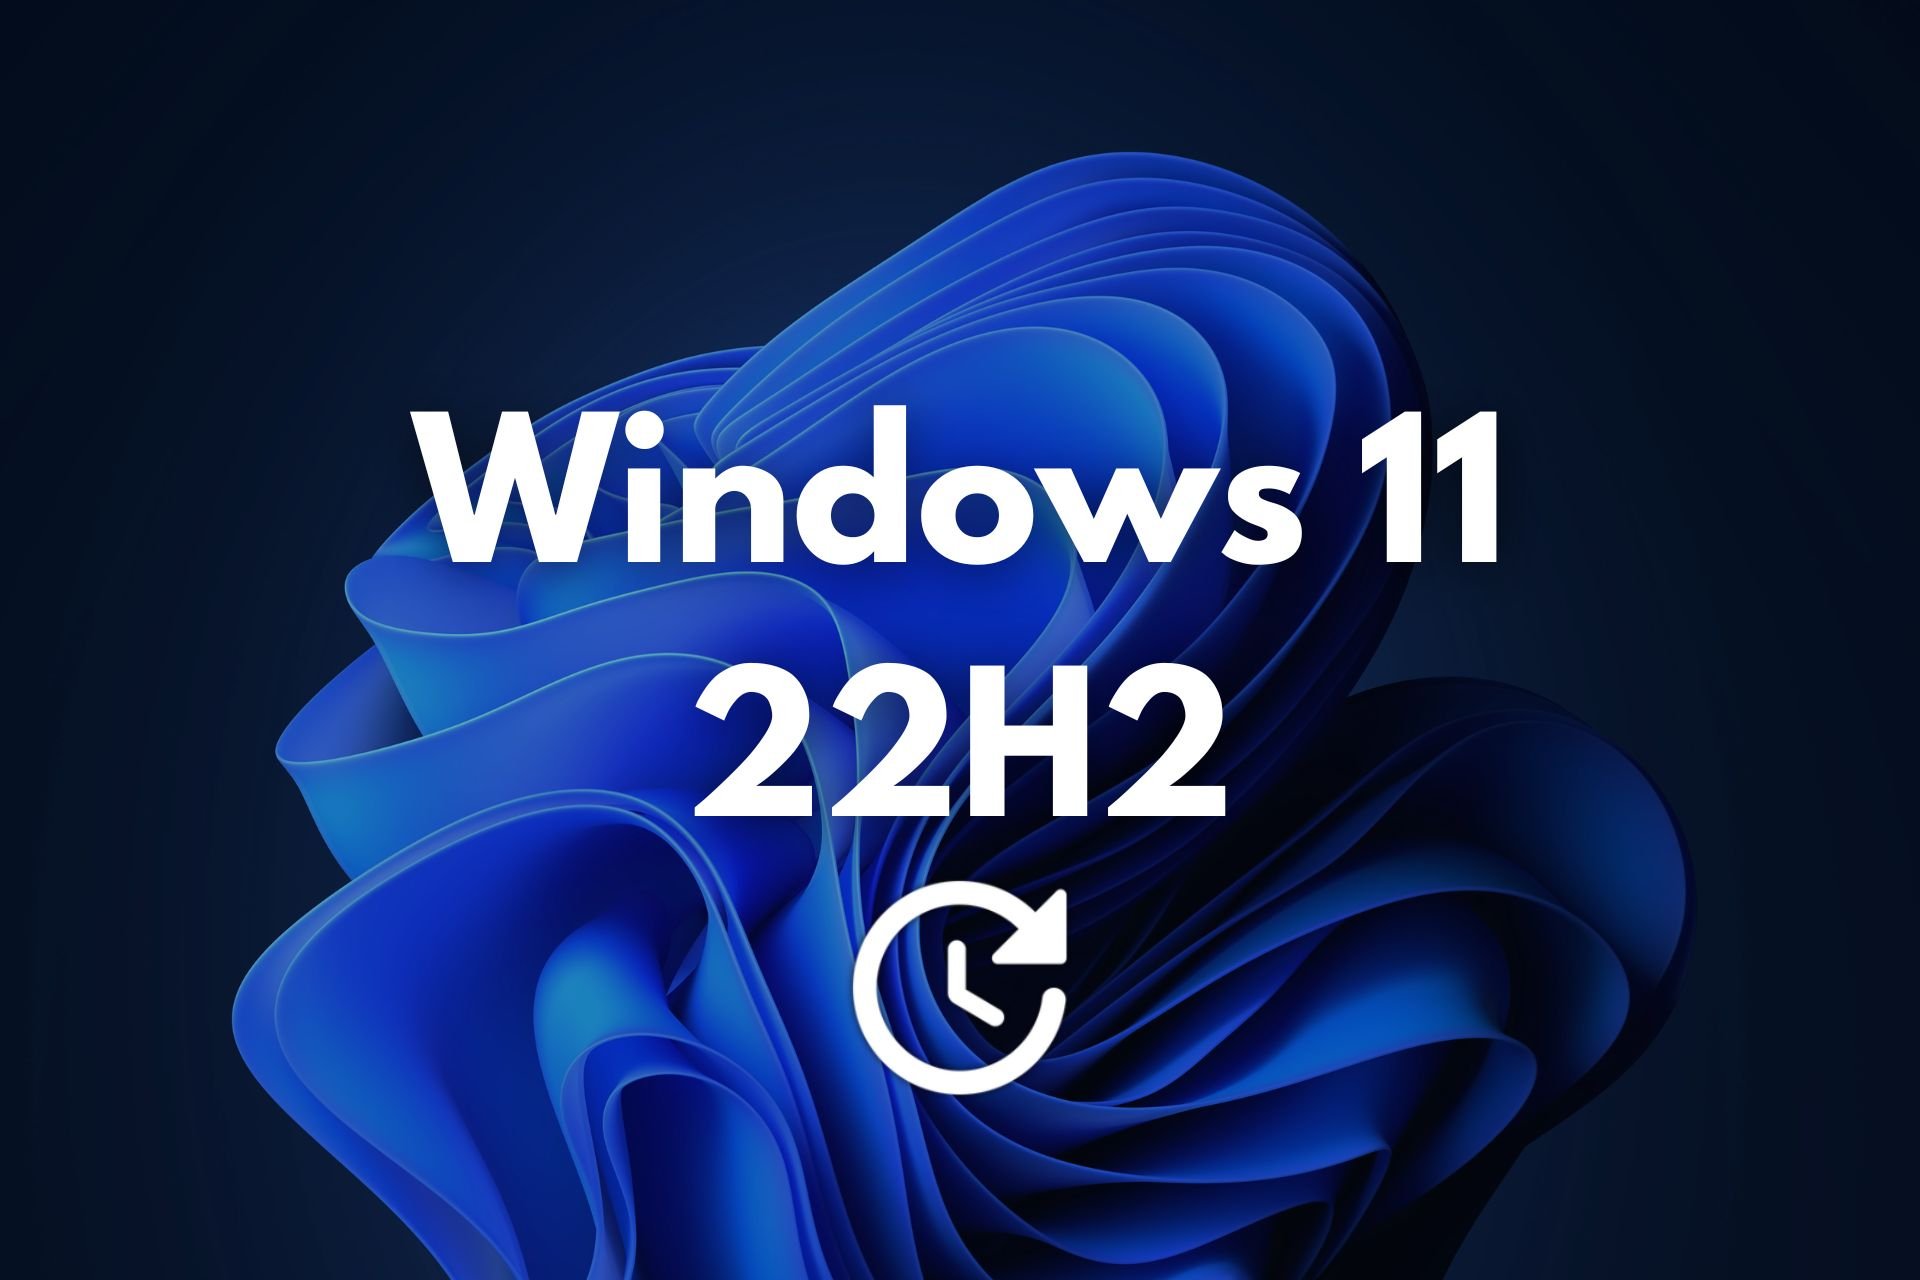 Windows 11 22H2 optional updates are delayed